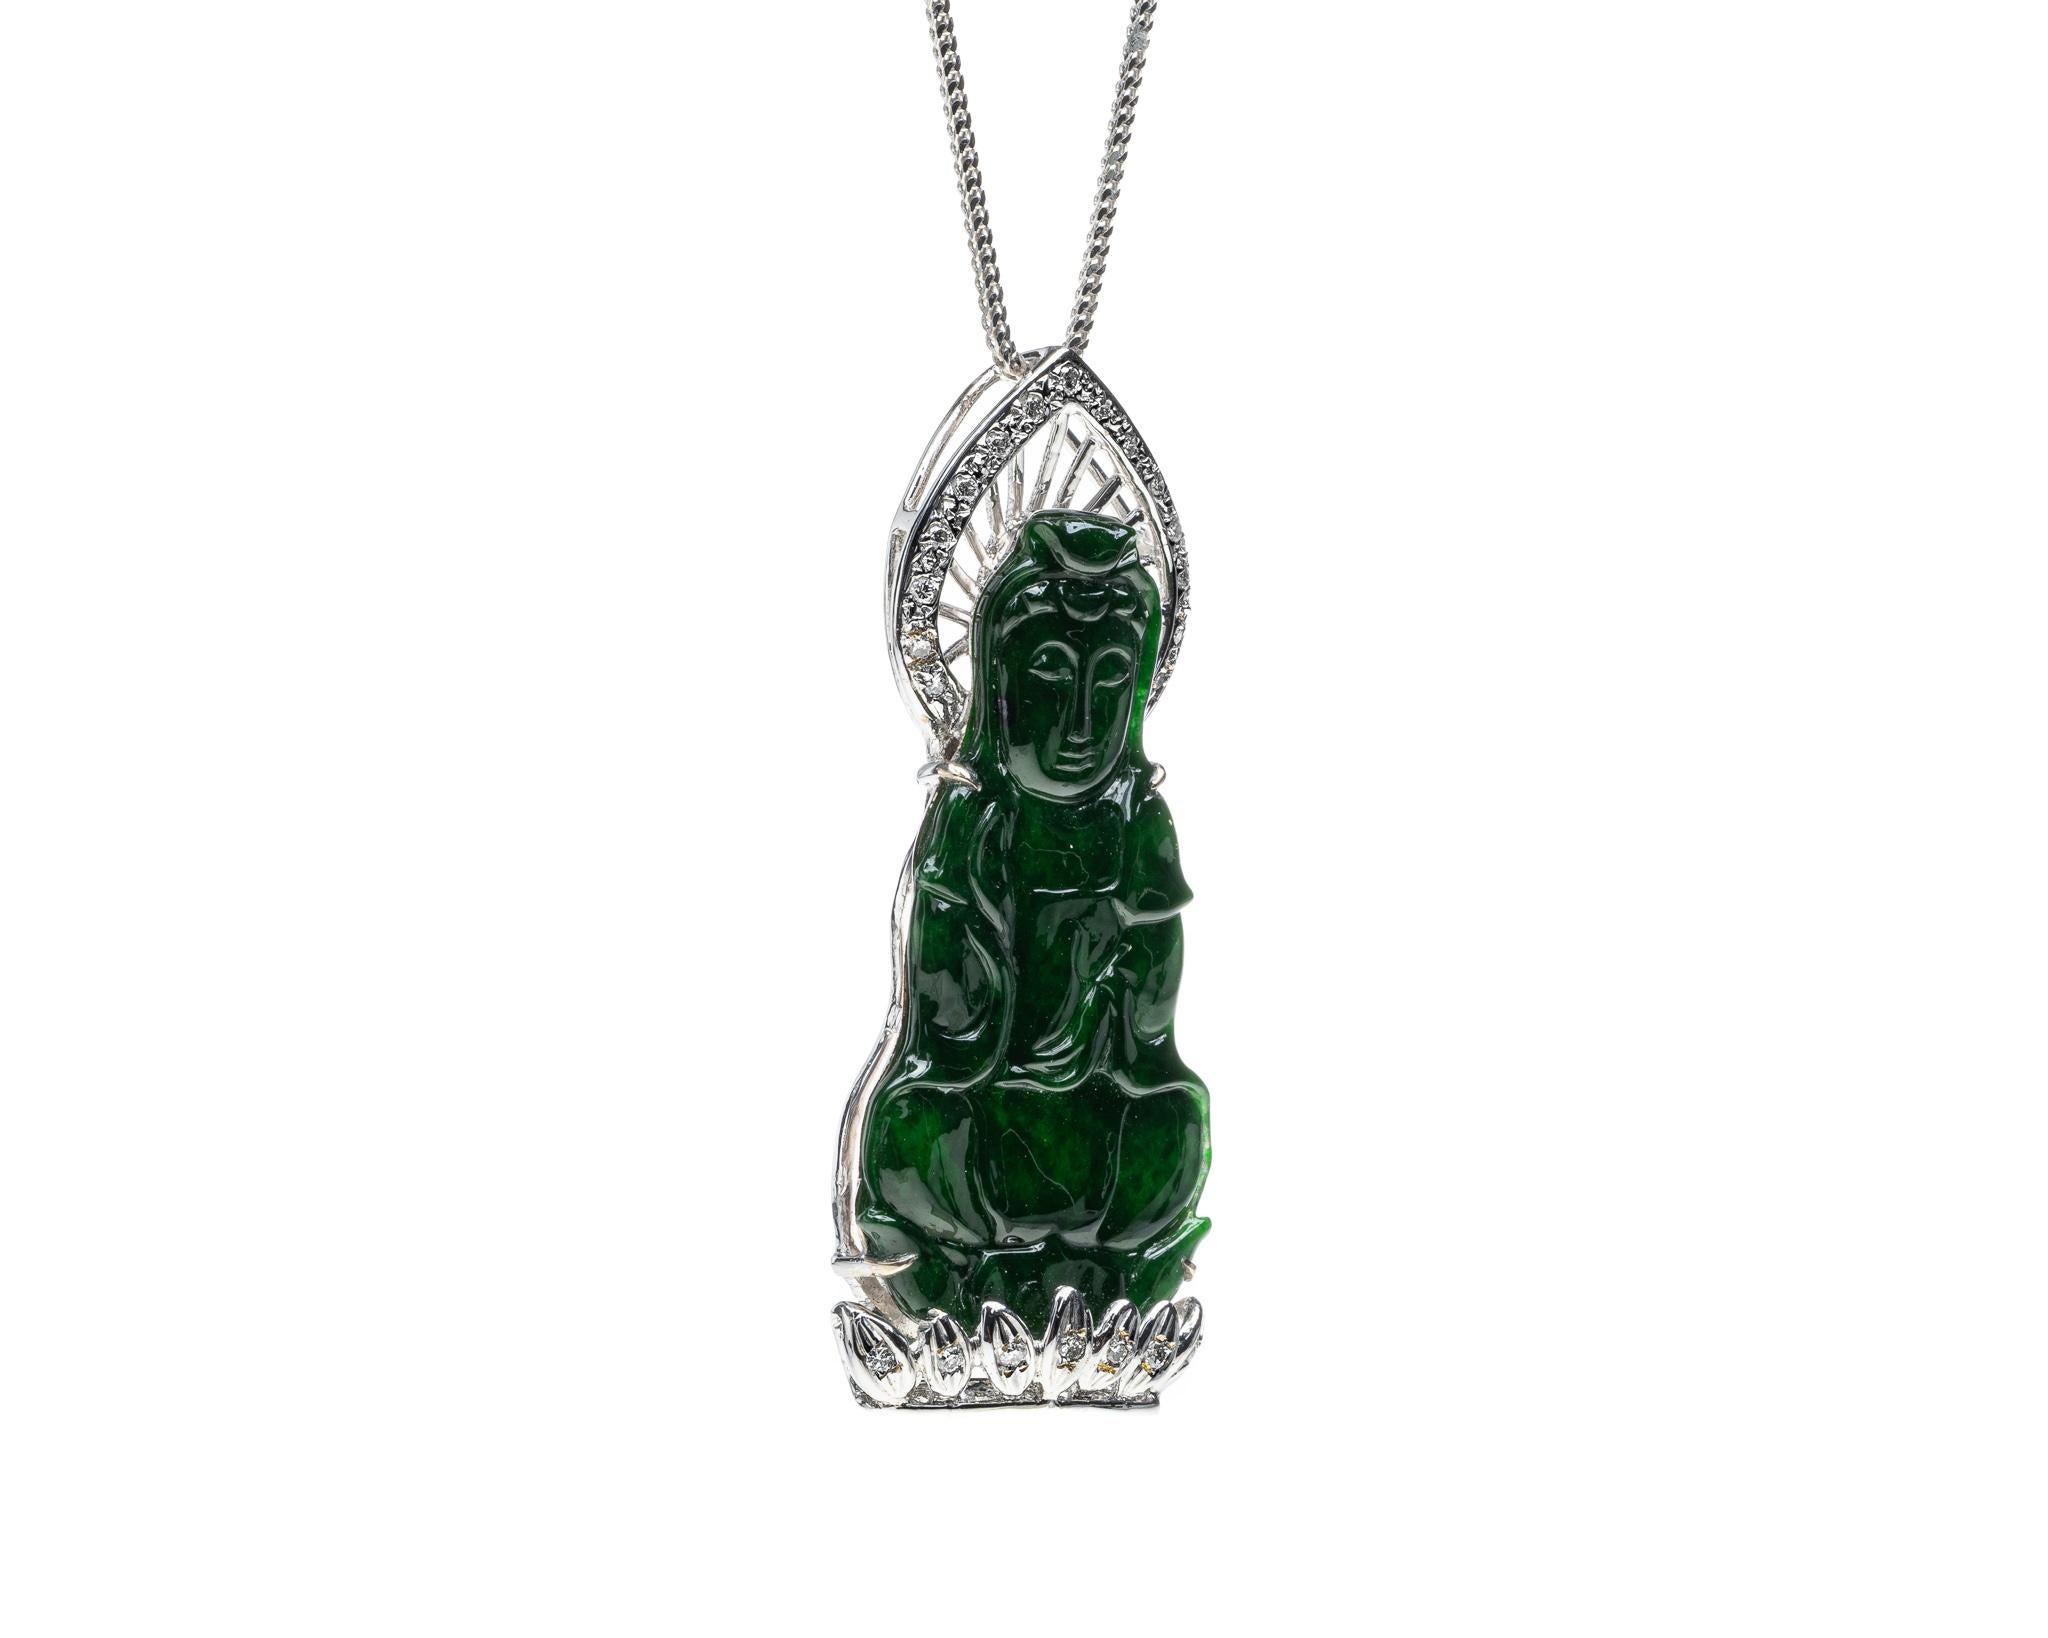 This is an all natural, untreated green jadeite jade carved Quan Yin god pendant set on an 18K white gold bail.  The carved Quan Yin god symbolizes compassion and protection. 

It measures 1.86  inches (47.3 mm) x 0.79 inches (20.2 mm) with